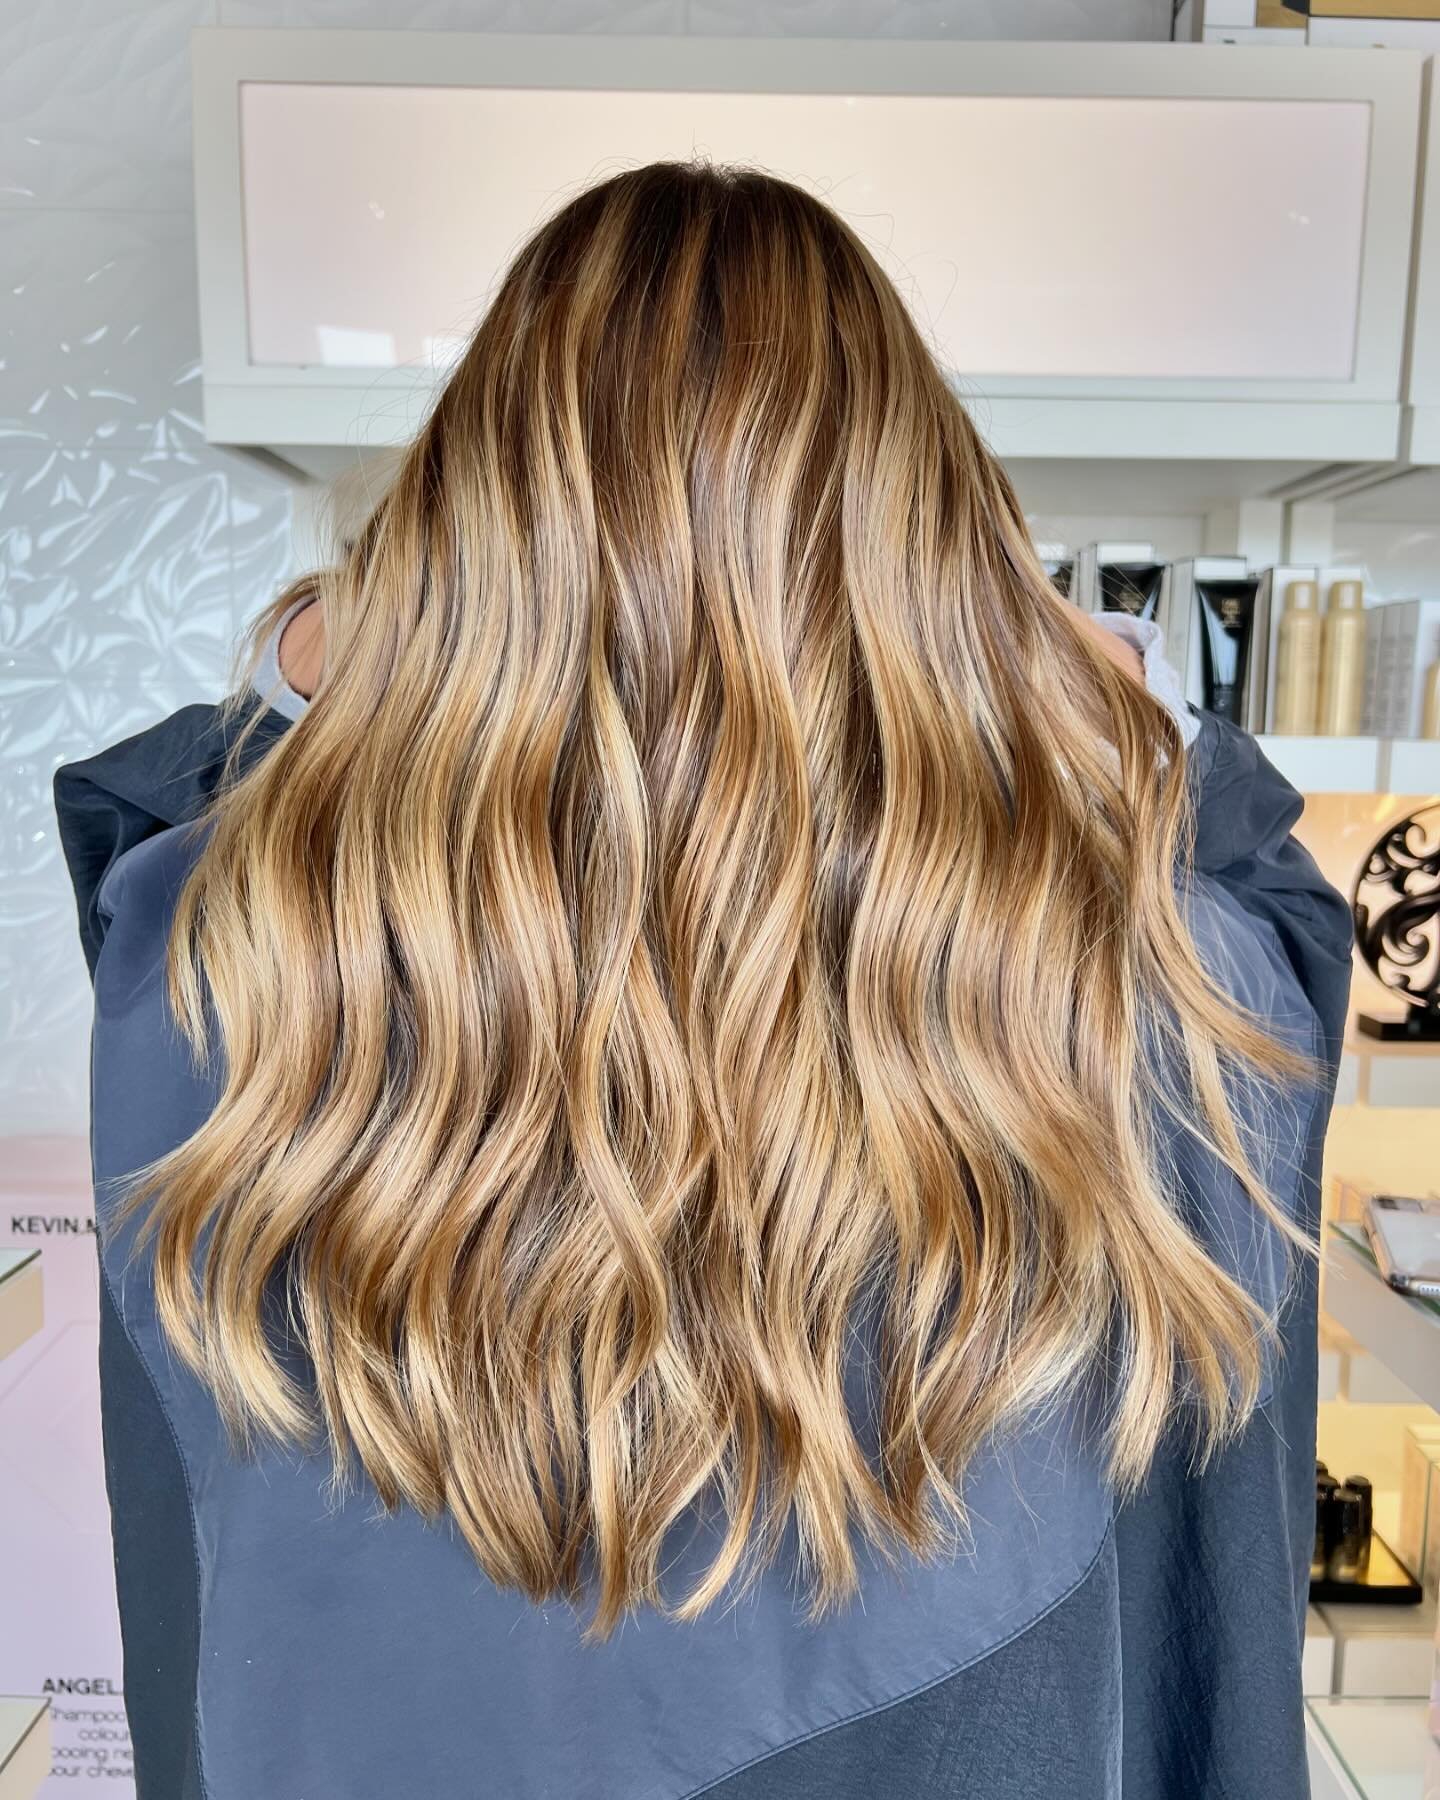 Golden hour ⭐️⭐️⭐️ 
&bull;
&bull;
&bull;
&bull;
To achieve this look we used our shine moisturizing cream and our heat protection by ✨Oribe✨  #oribe #oribeobsessed #oribehair #hairsylist #goldenhour #hair #hairsalon #hermosasalon @hairby_tima